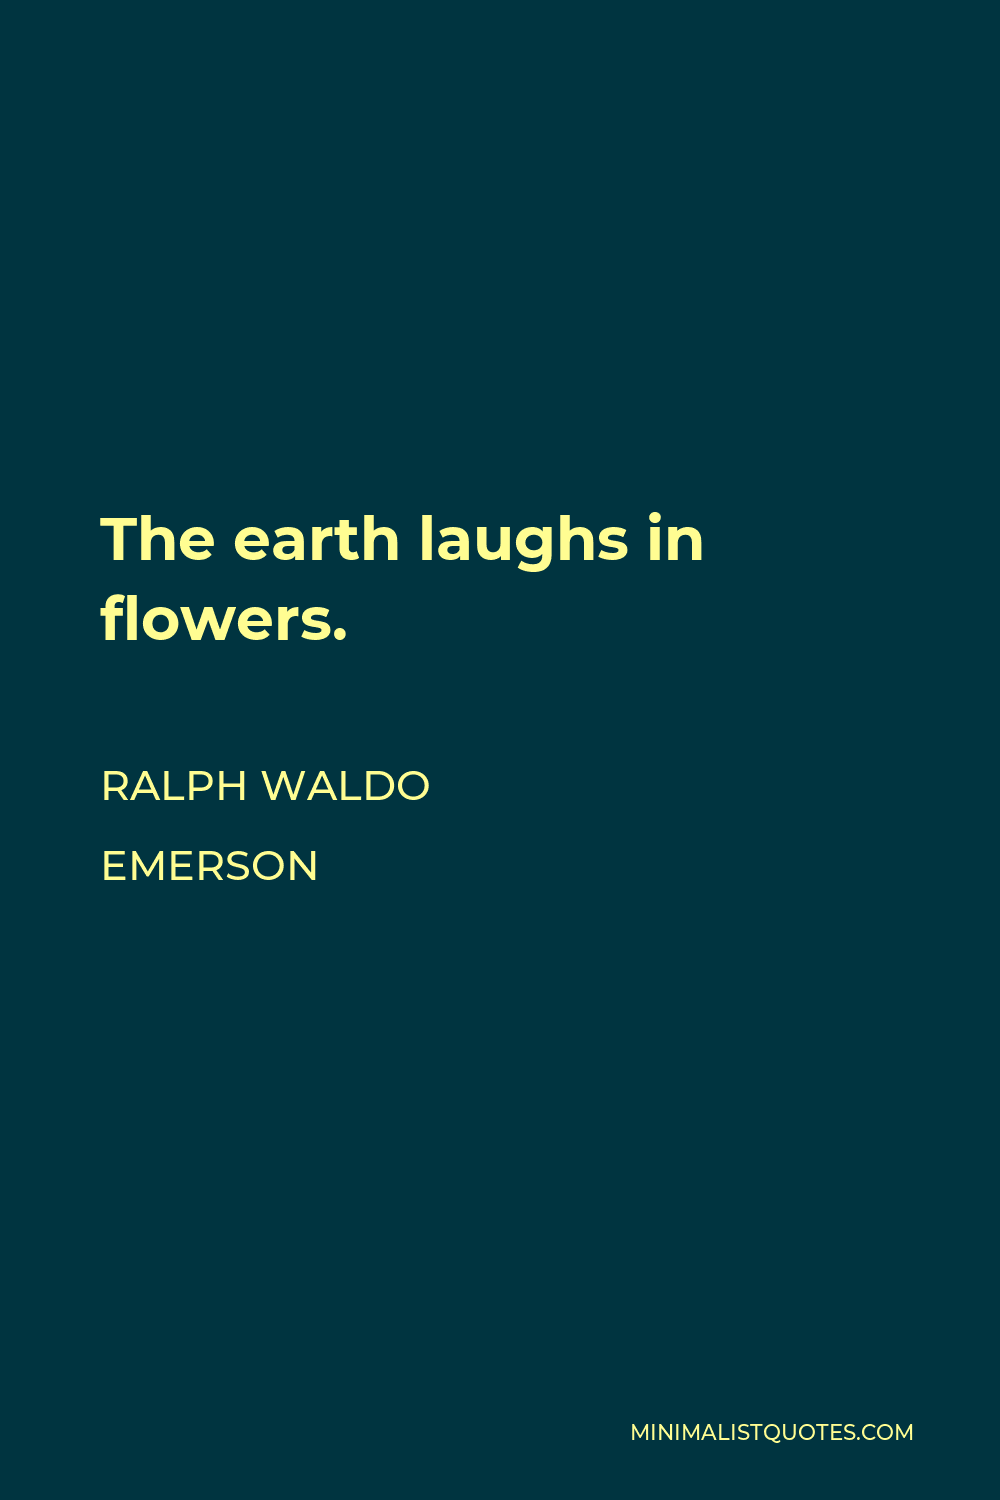 Ralph Waldo Emerson Quote - The earth laughs in flowers.